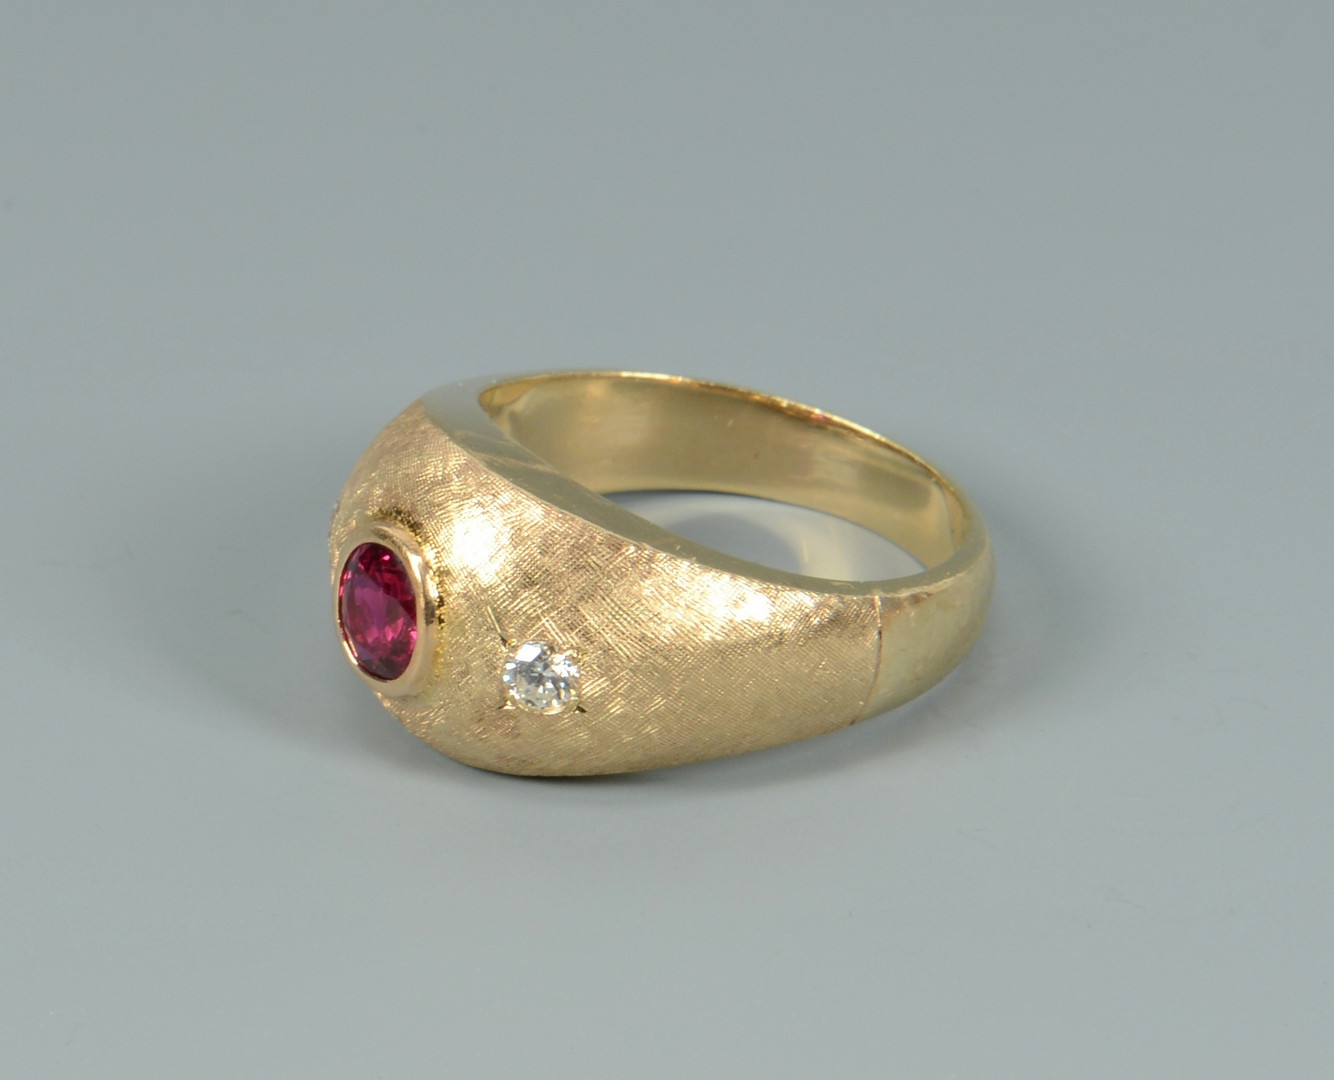 Lot 104: 14k ruby and diamond ring